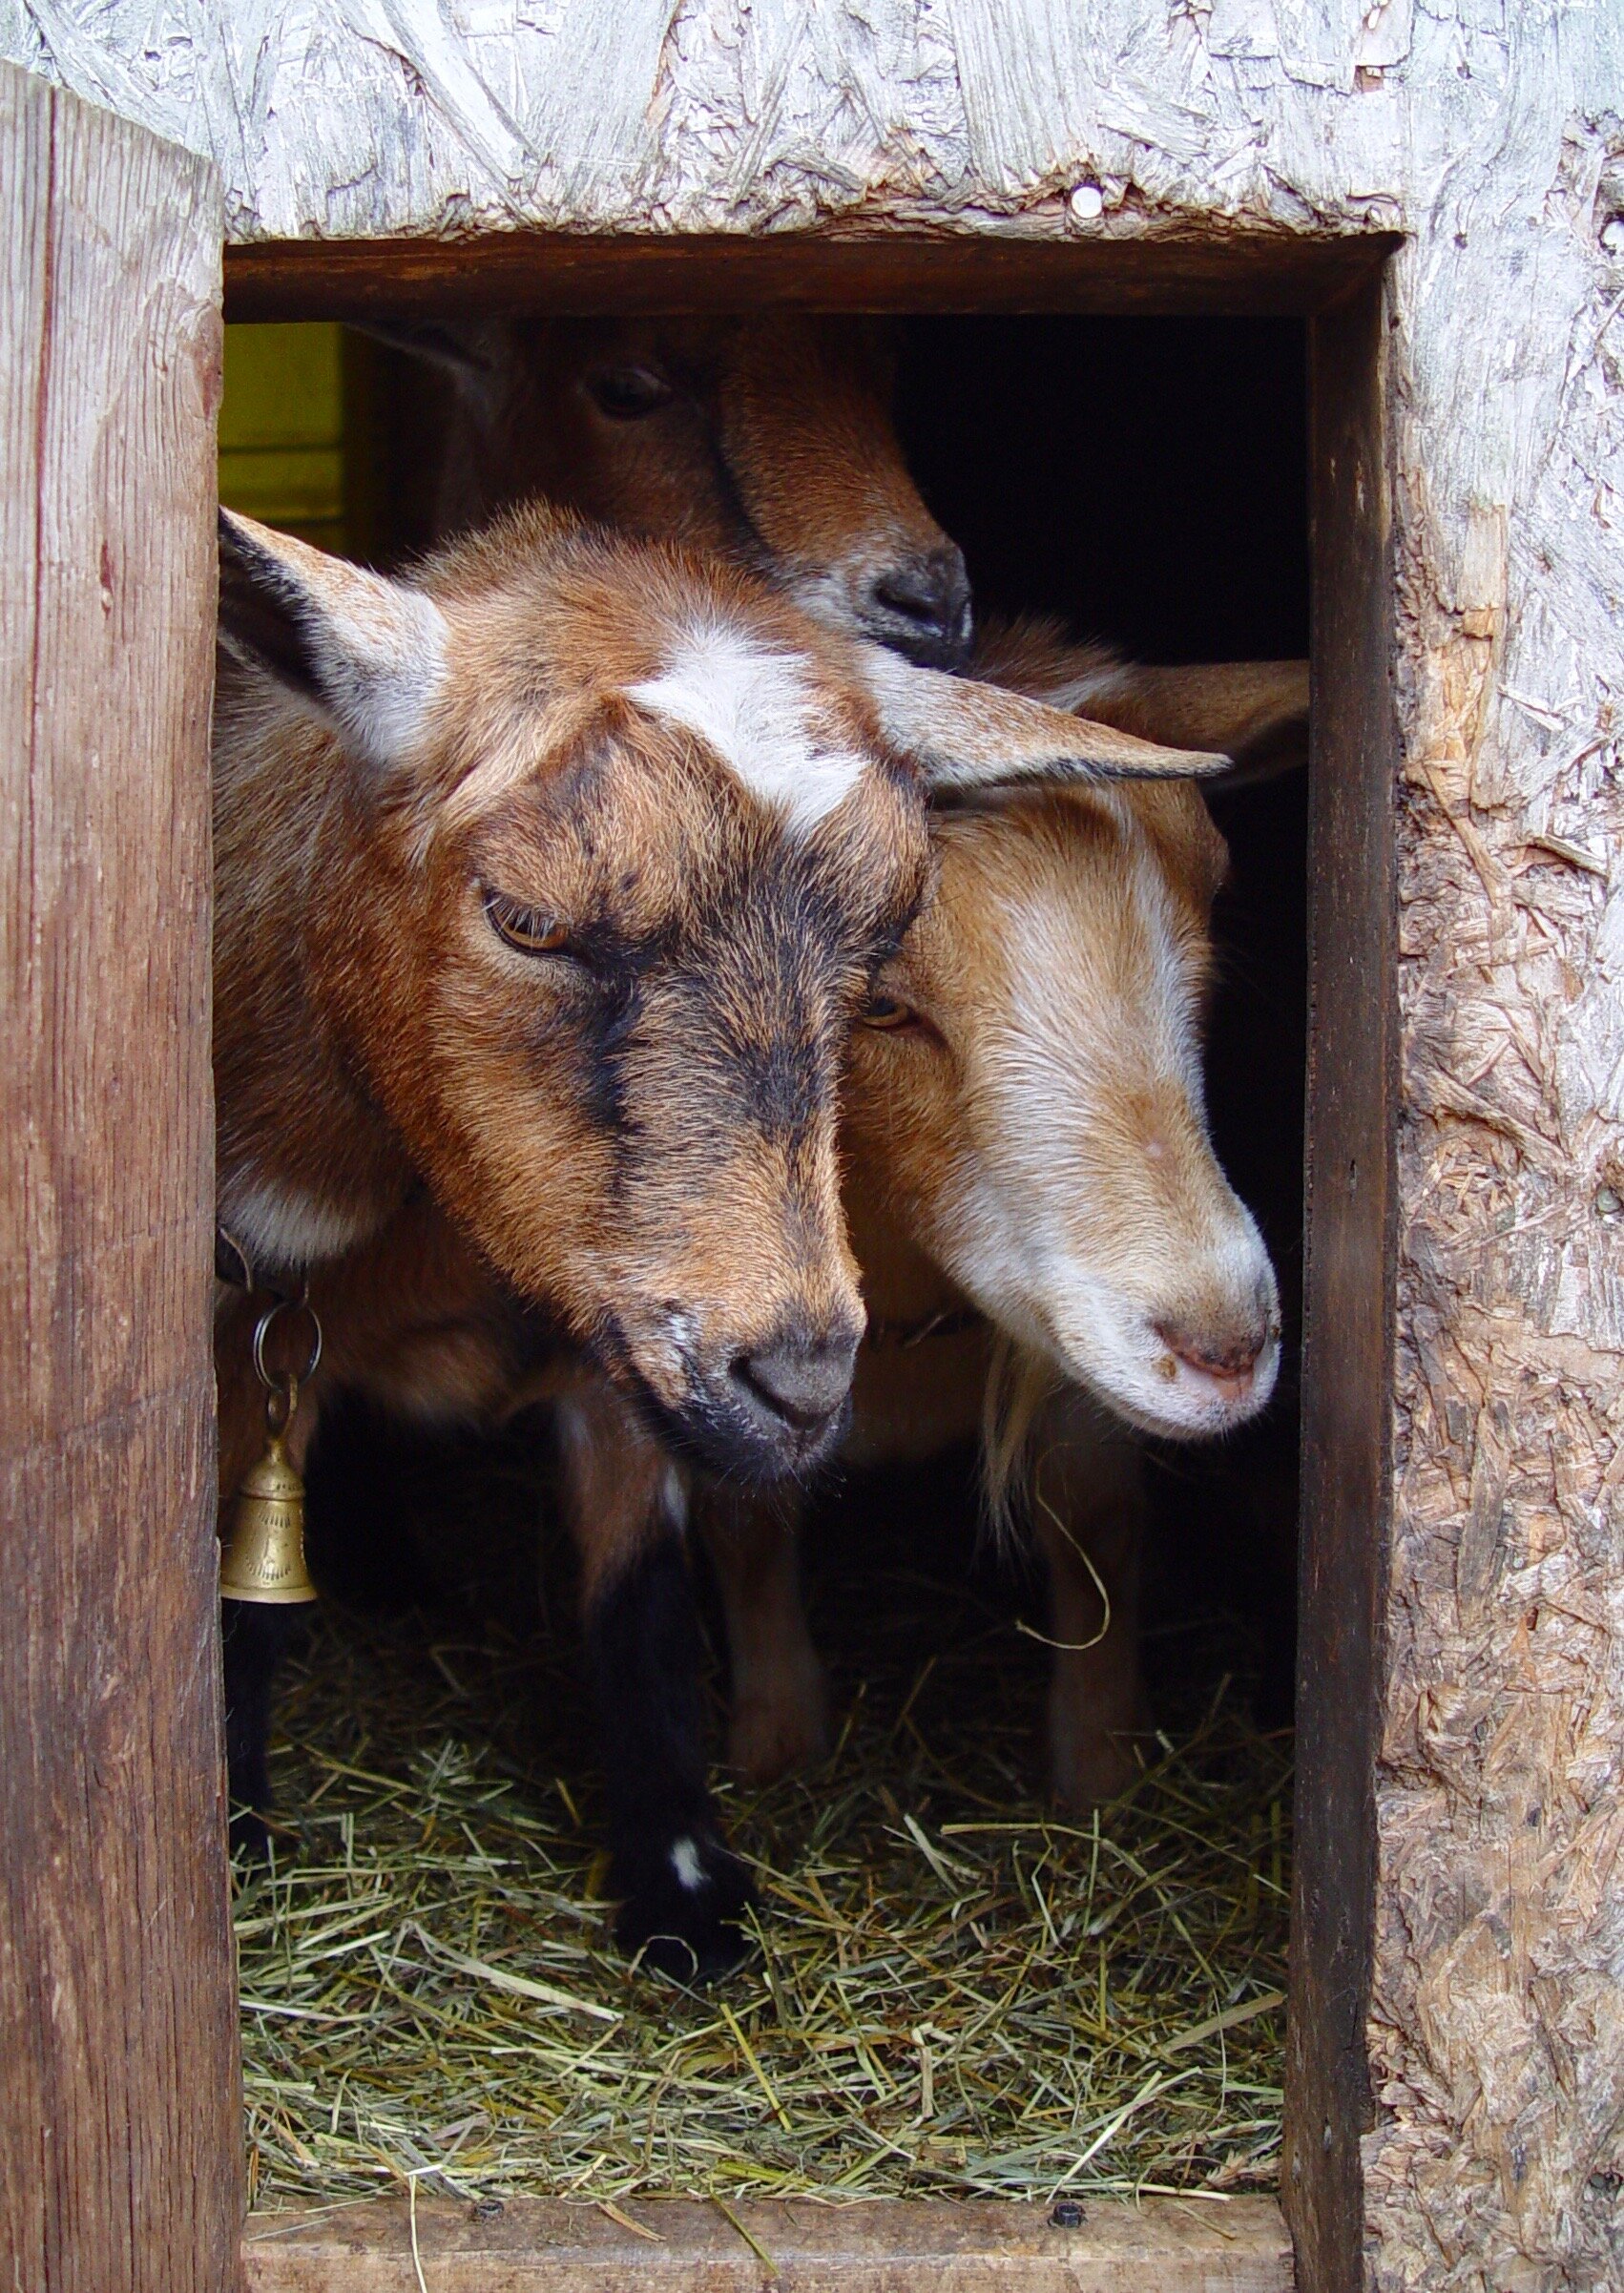 Zippy peeking out of her shed with Mary Jane - 2007